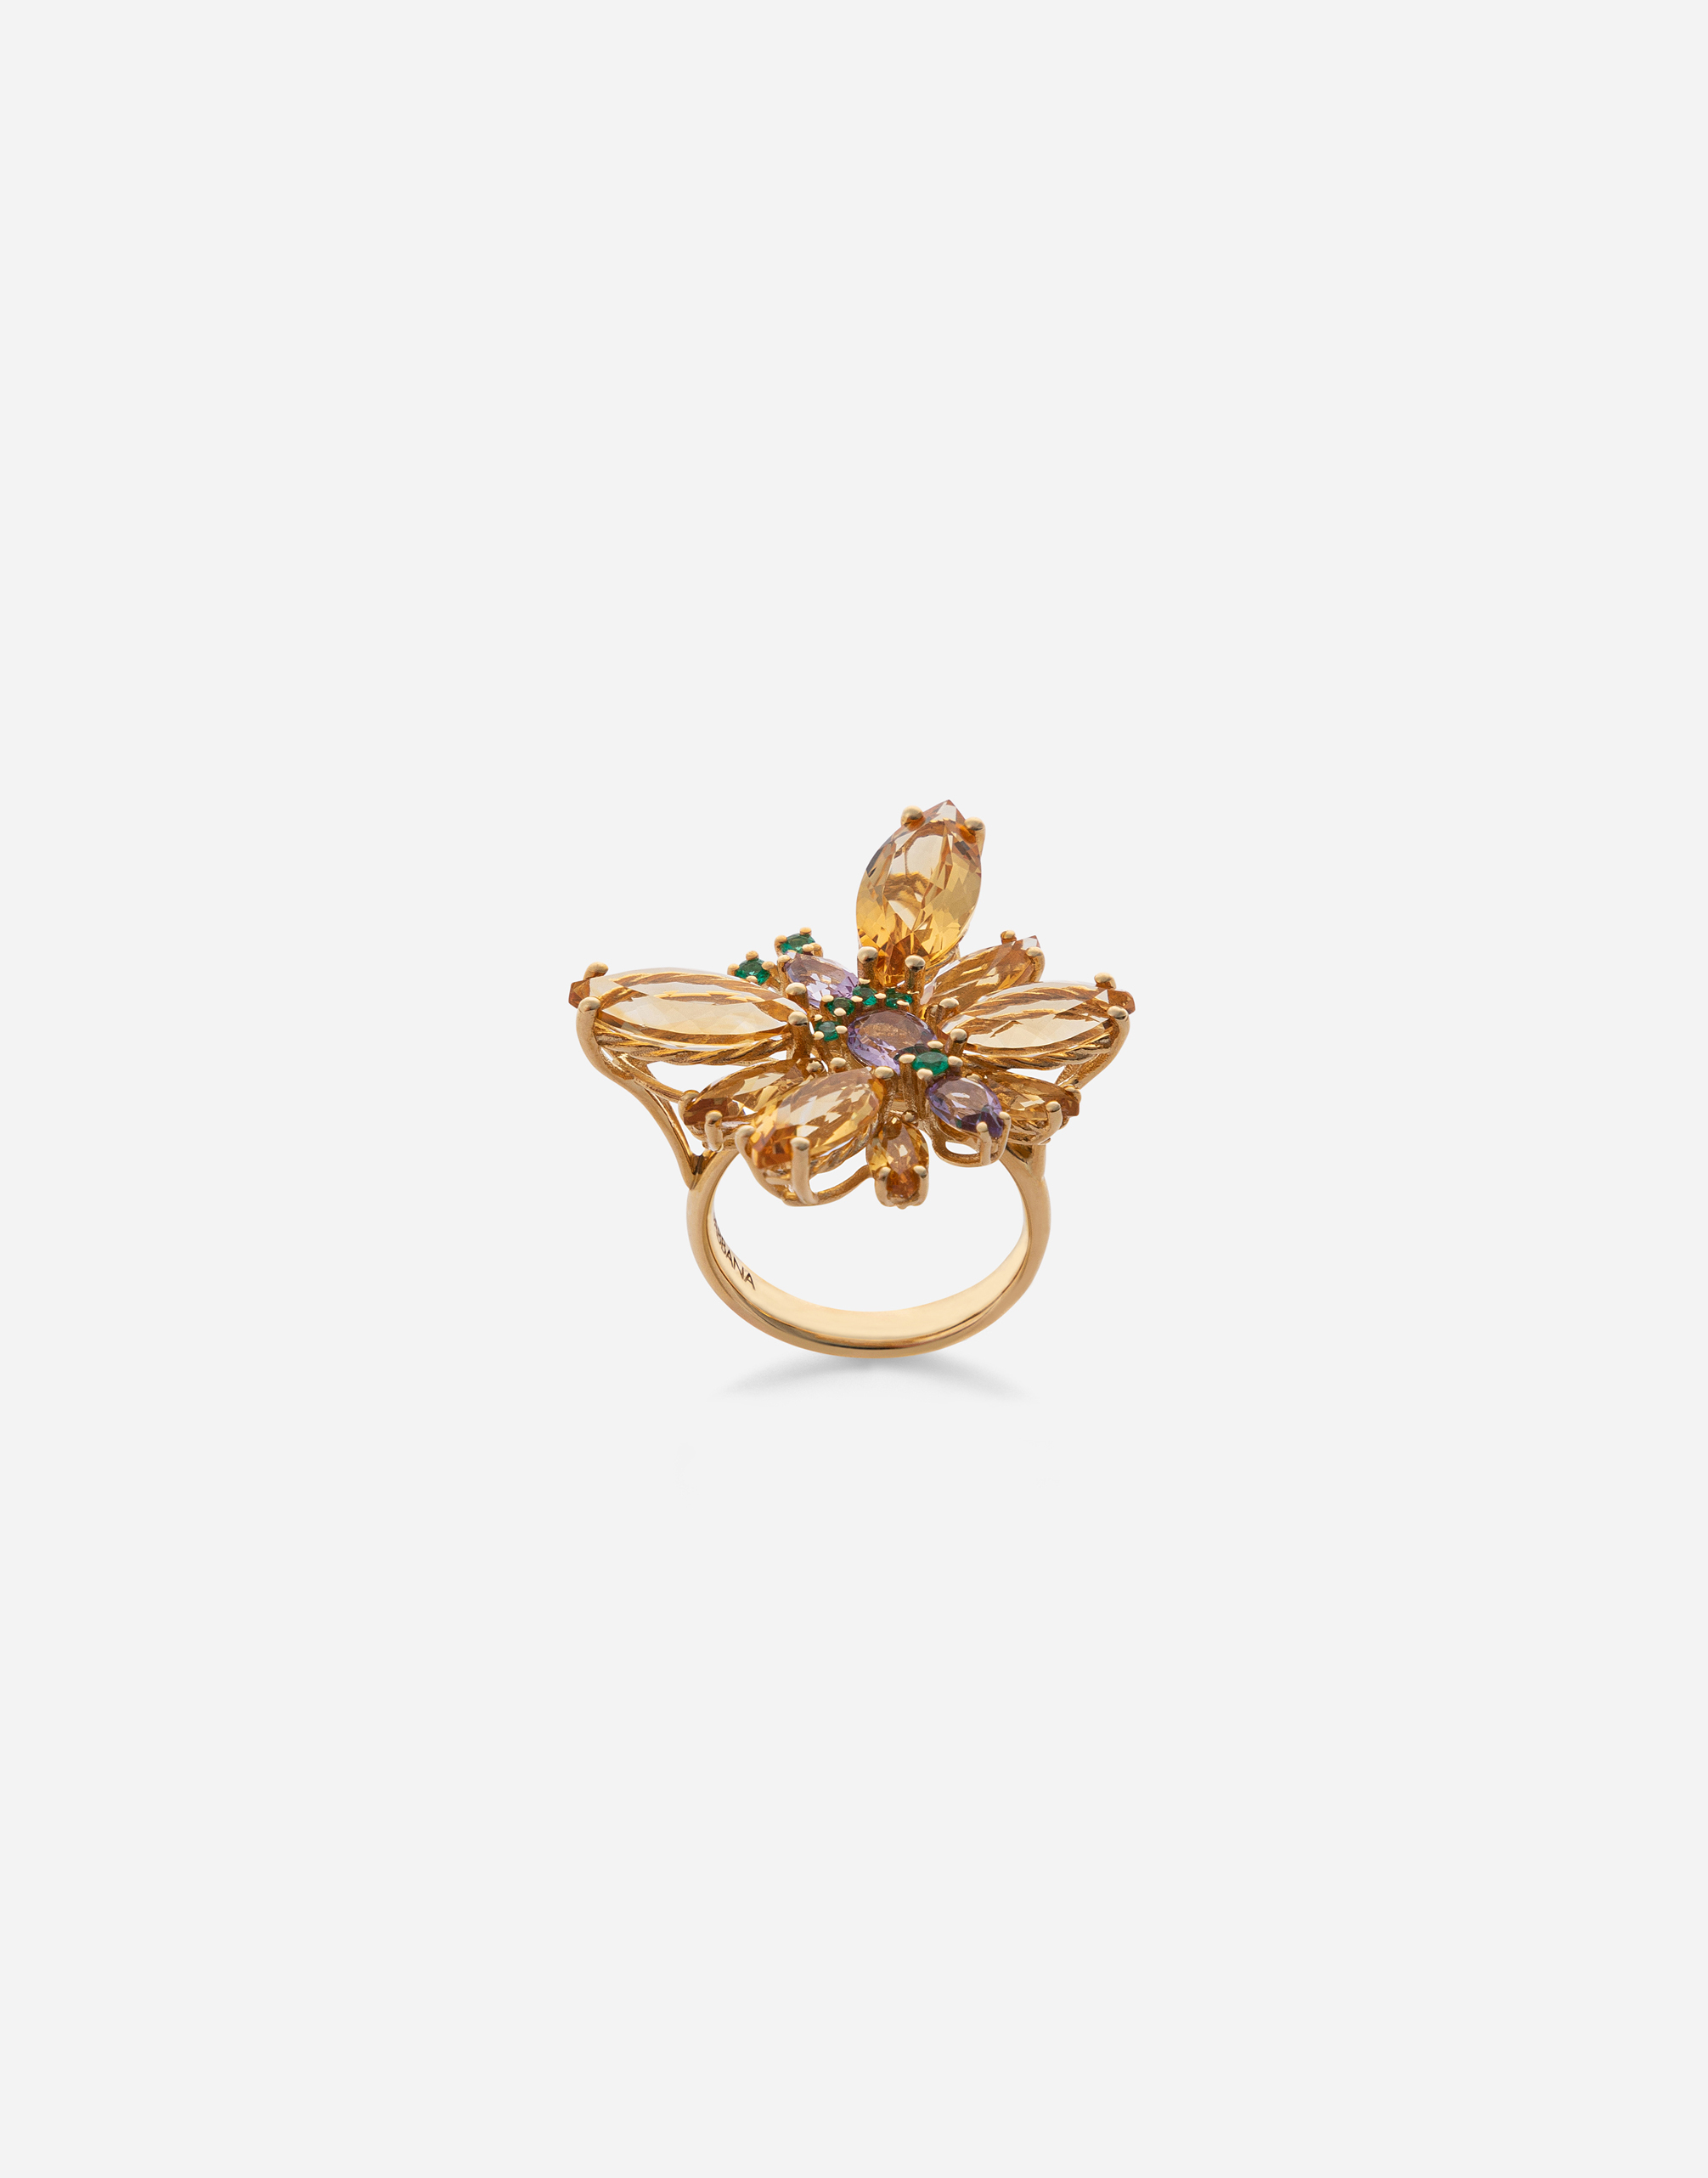 Spring ring in yellow 18kt gold with citrine butterfly in Gold